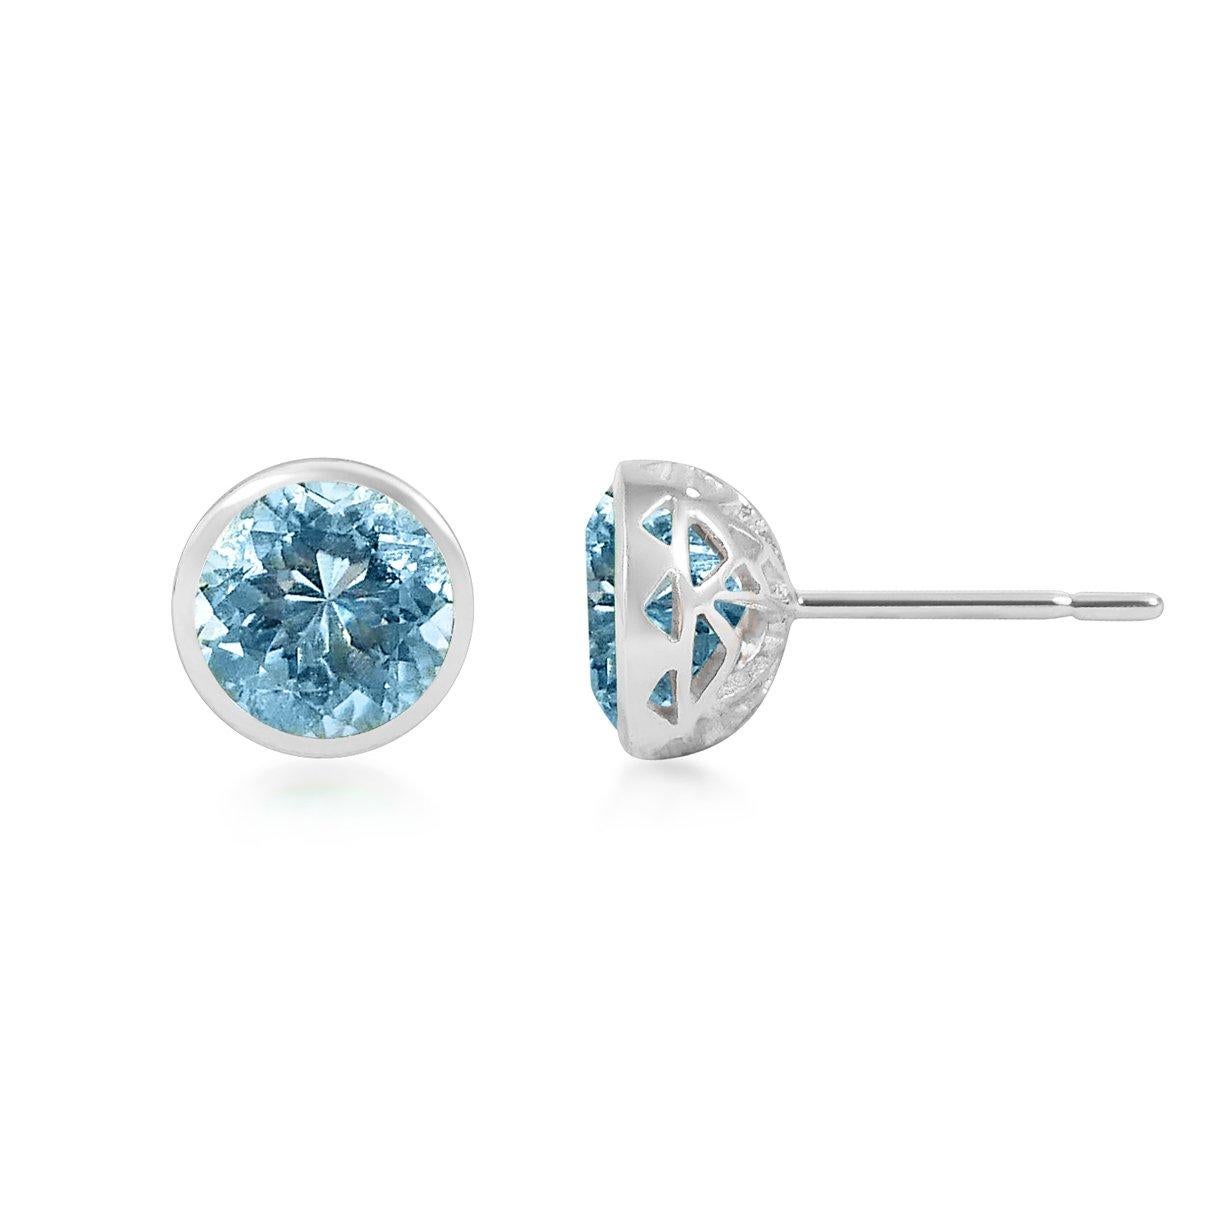 Handcrafted 2.70 Carats Aquamarine 18 Karat White Gold Stud Earrings. The 8mm natural stones are set in our iconic hand pierced gold lace to let the light through our precious and fine stones our earrings are the perfect everyday wear.

Just like